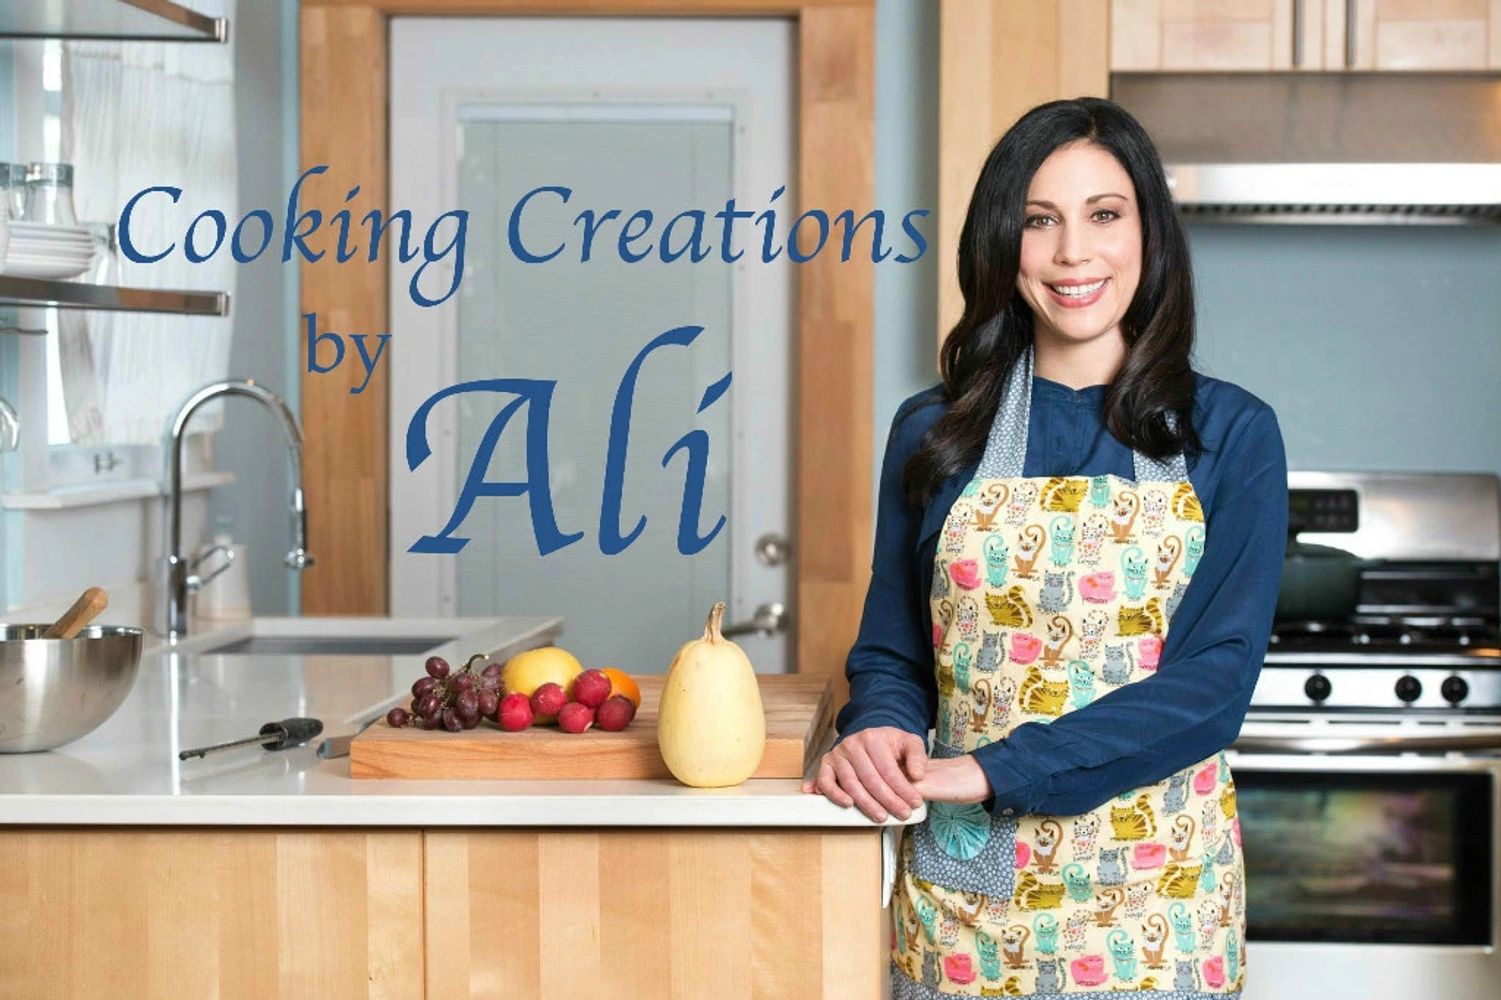 
Cooking Creations by Ali